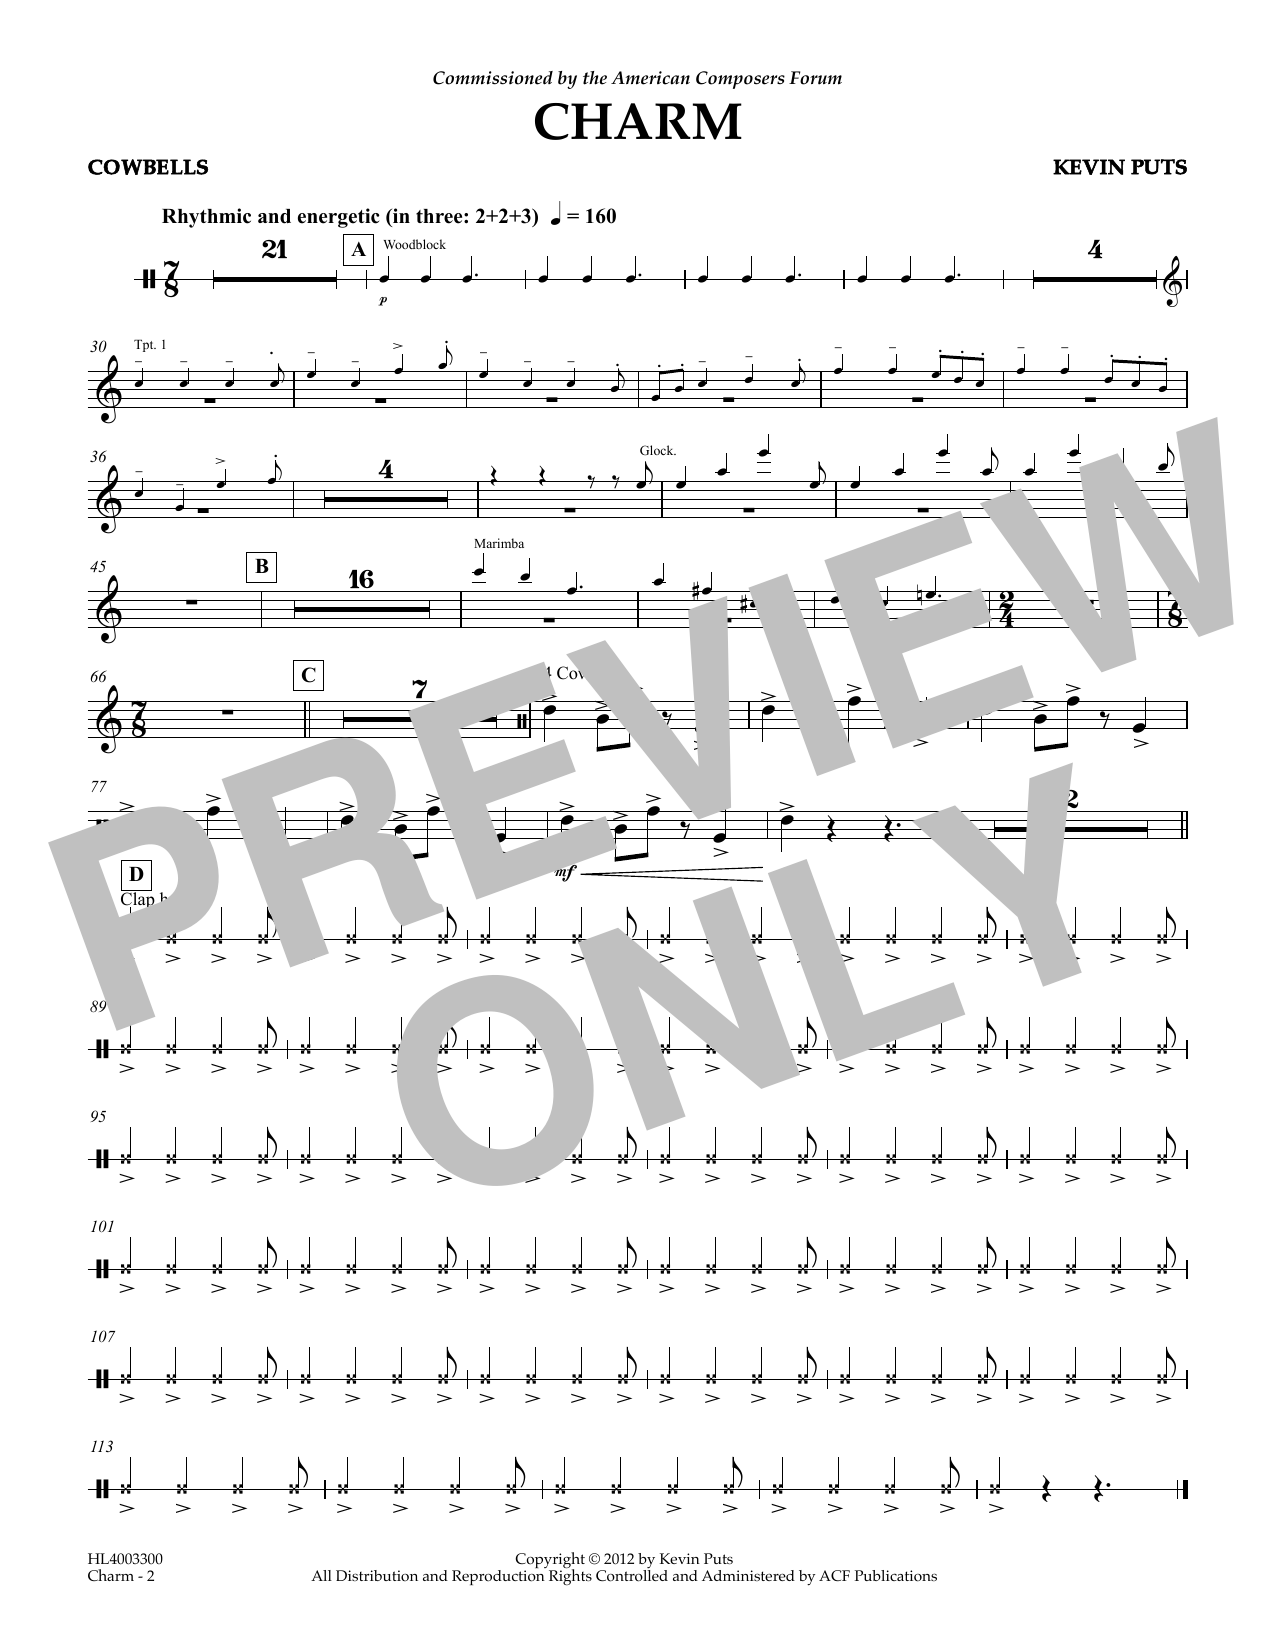 Download Kevin Puts Charm - Cowbell Sheet Music